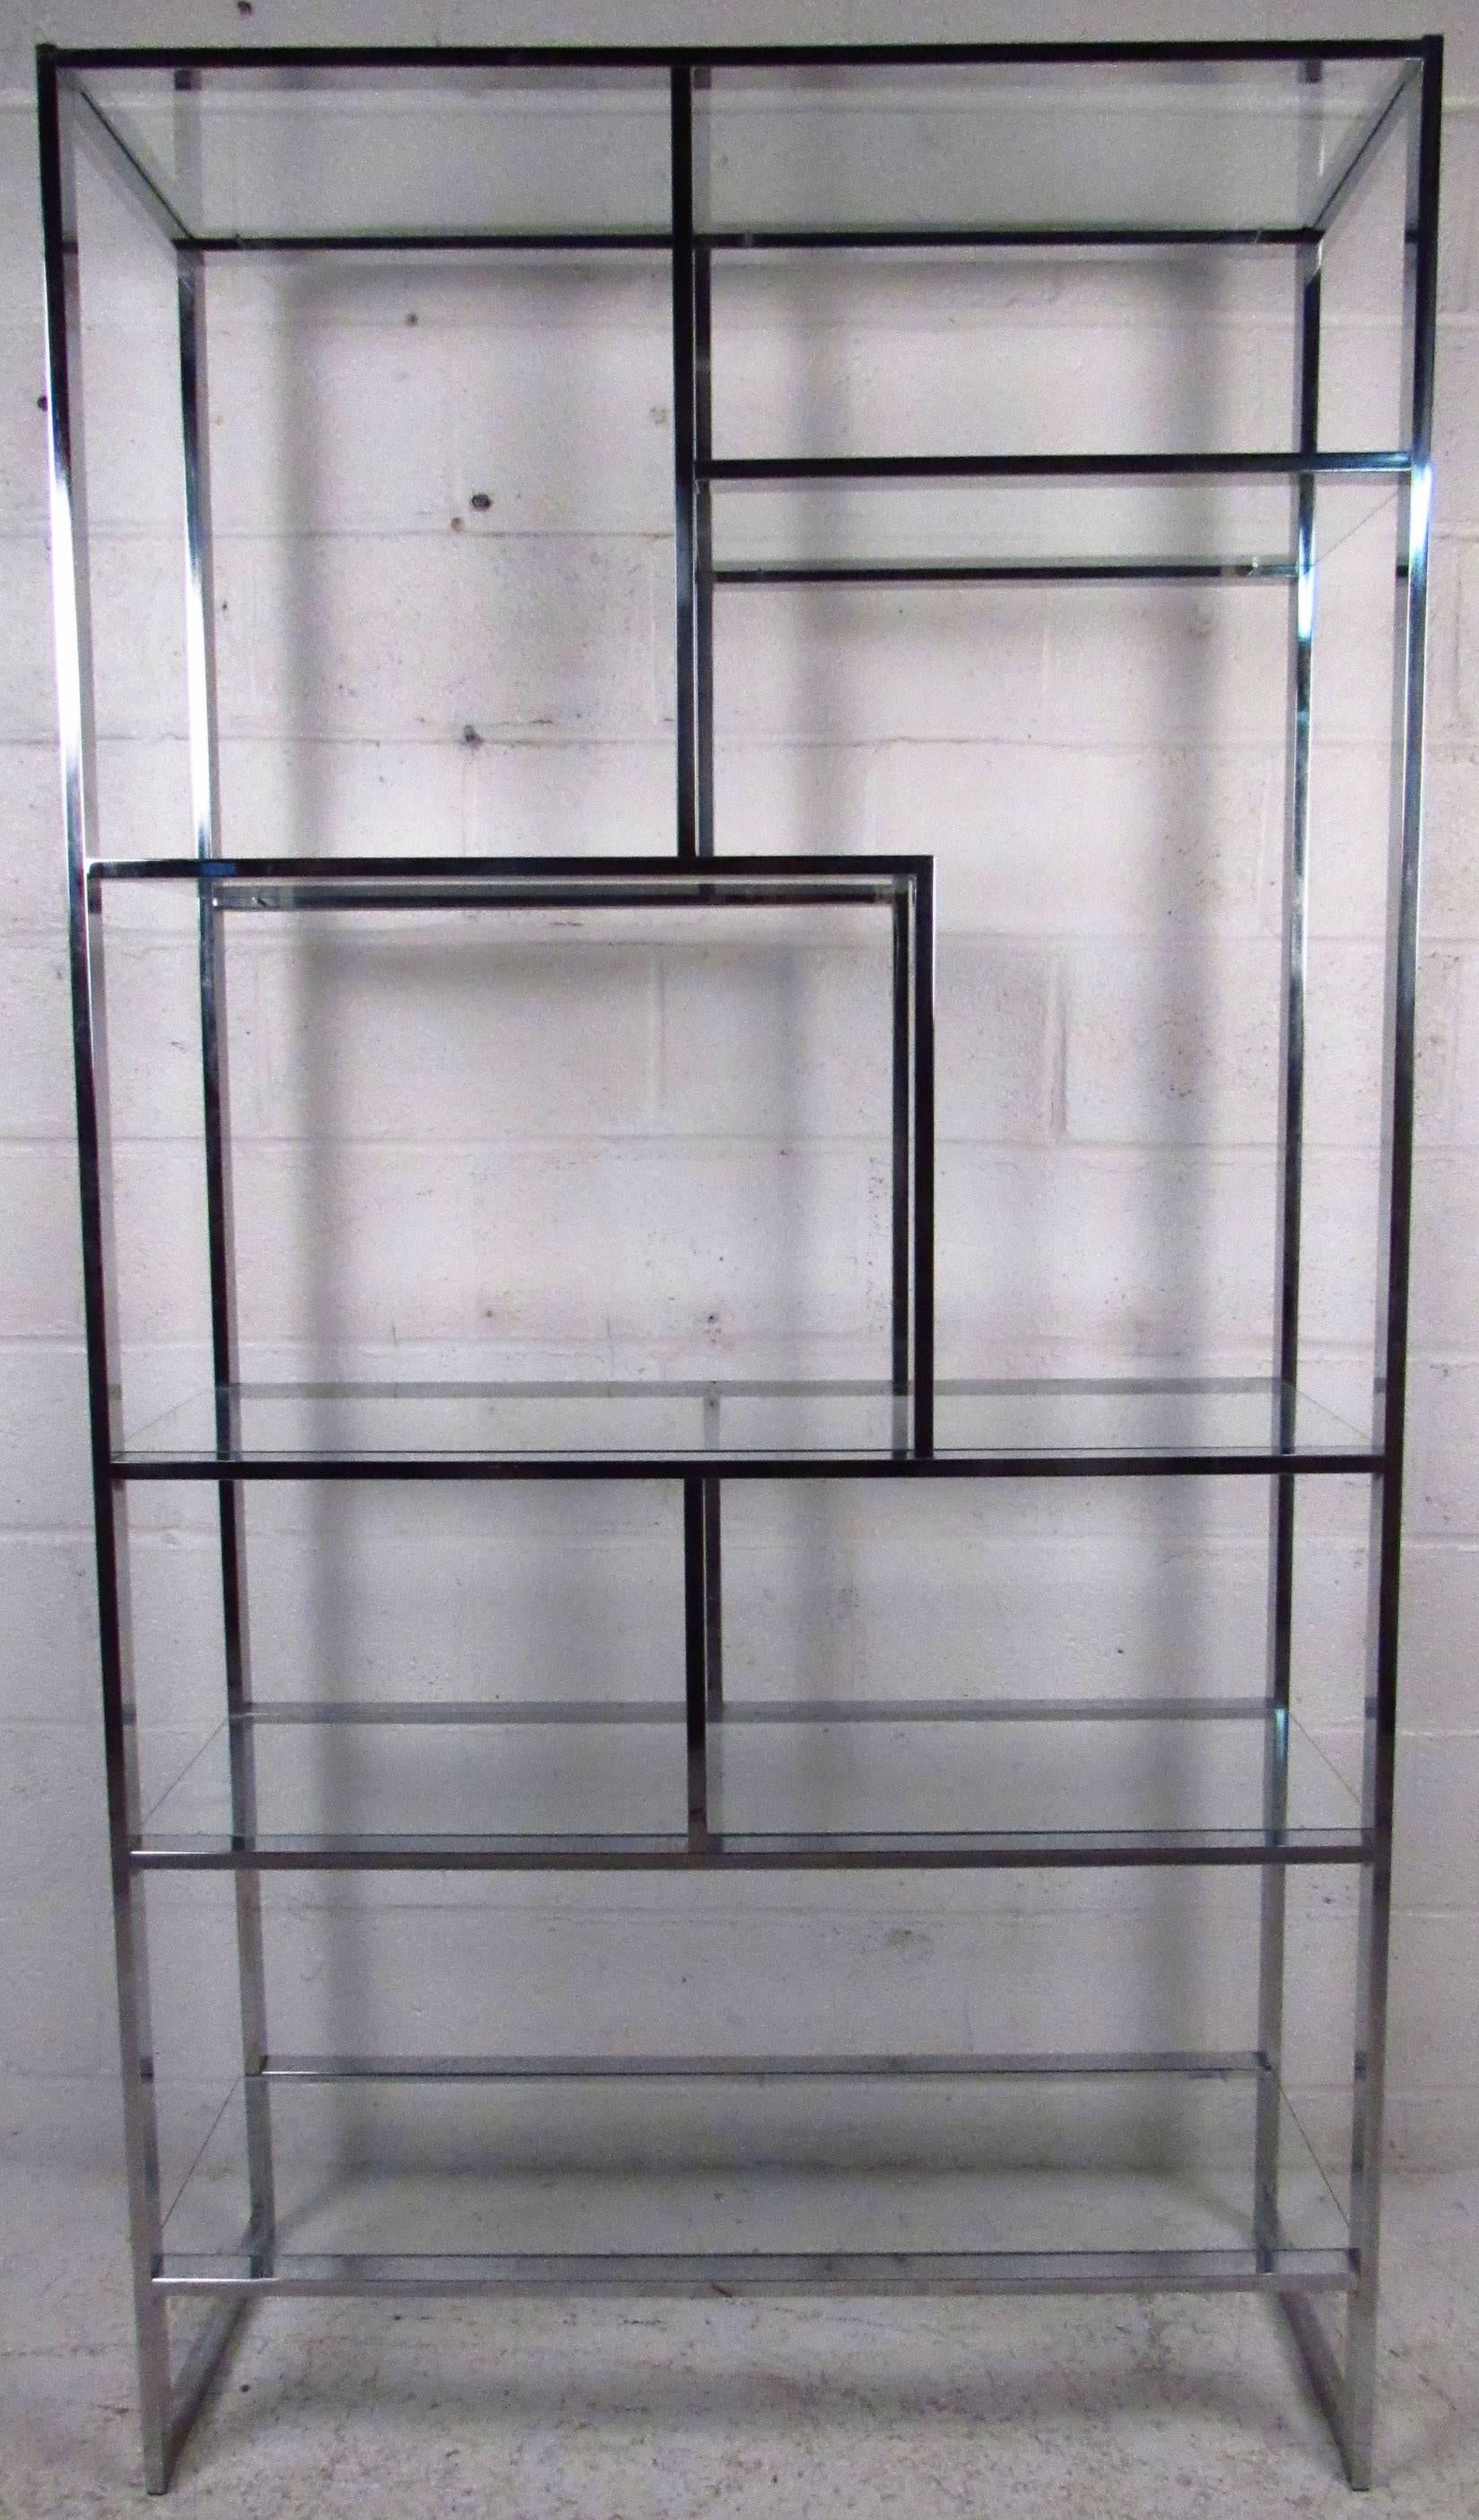 Vintage modern étagère featuring sculpted chrome body with glass inserts, designed by Milo Baughman. Ideal midcentury shelf unit for home or store display, this quality vintage shelf display adds an elegant 1960's statement to an interior. Please